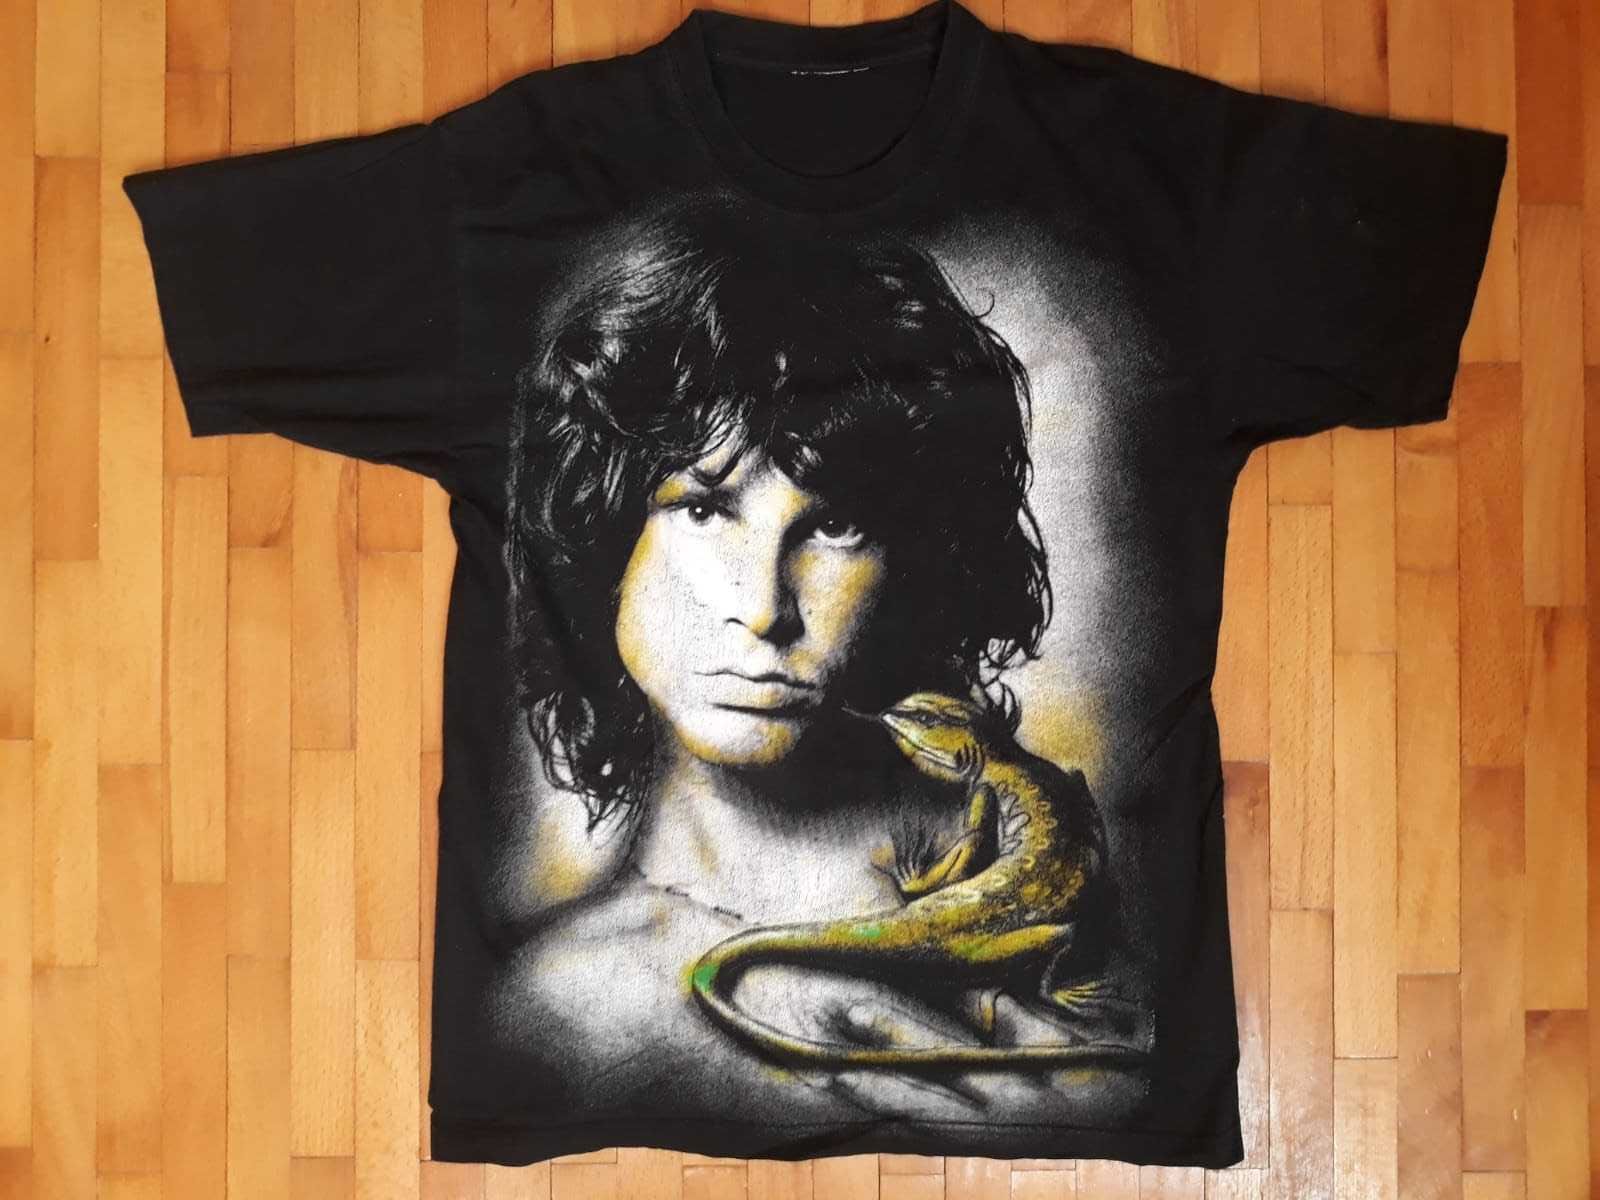 Tricou vintage rock The Doors, KISS, Alice Cooper, IN Extremo